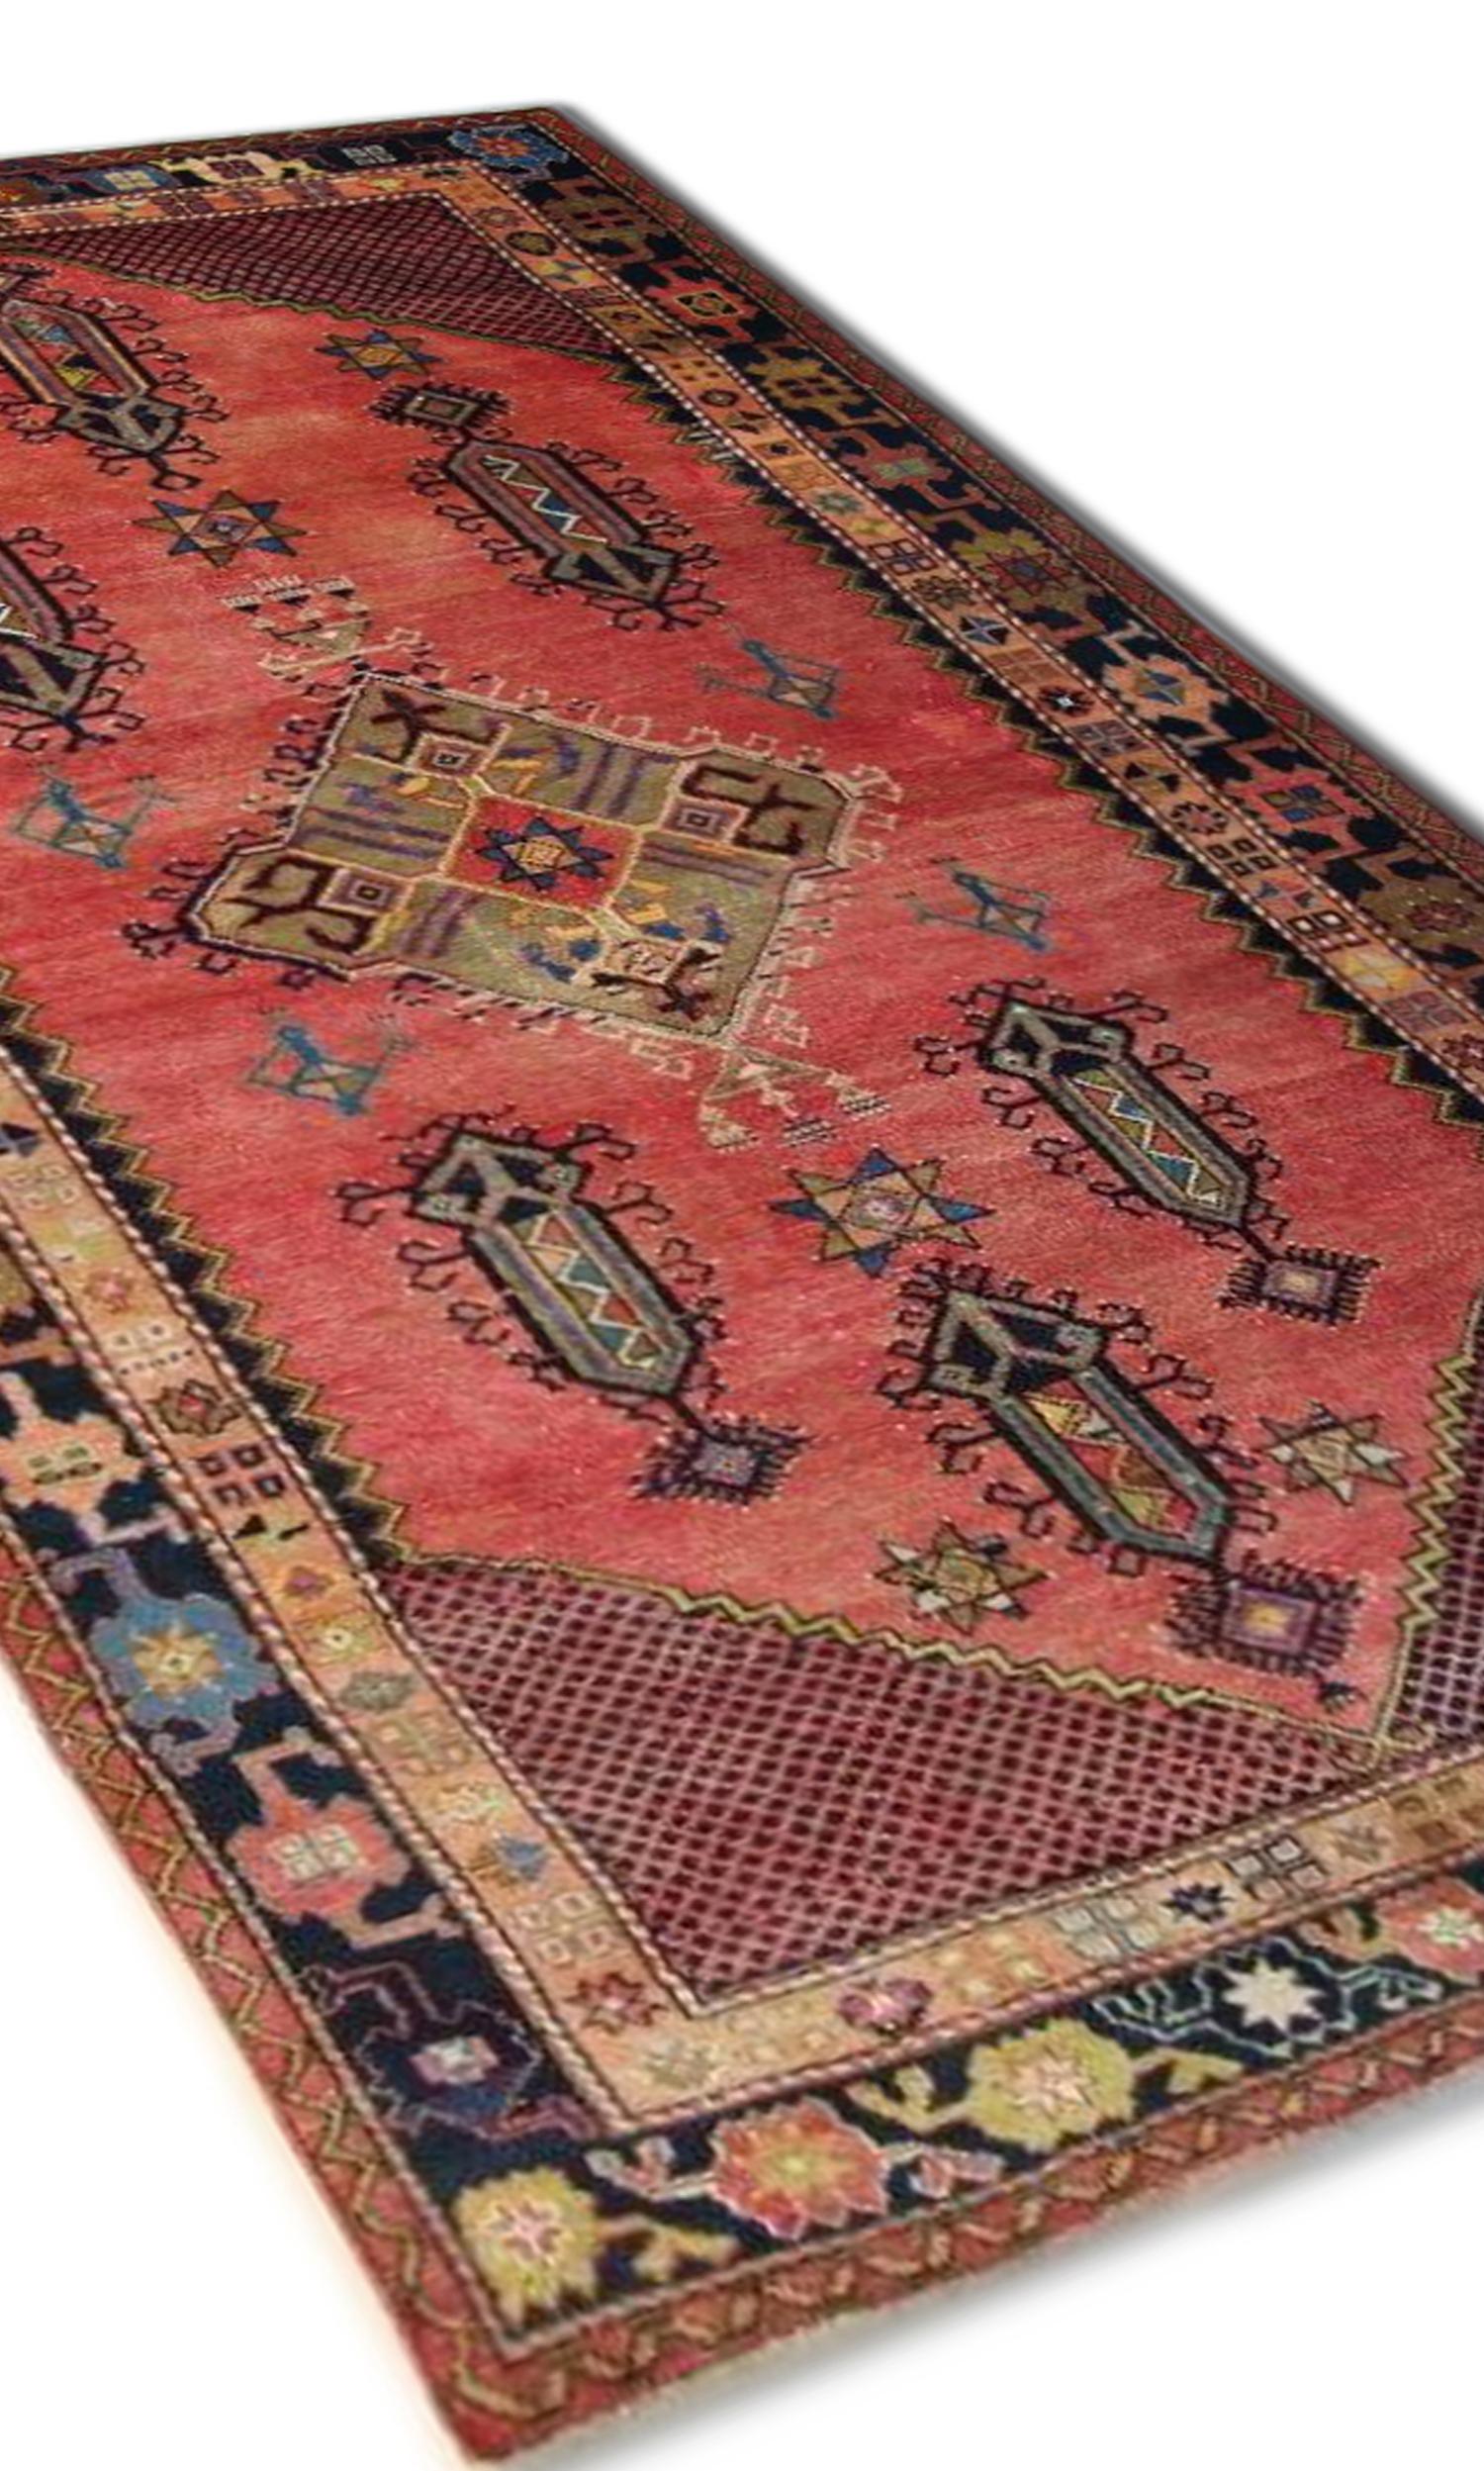 This beautiful antique Turkish rug features a vibrant rust field that holds a large central medallion and six smaller surrounding medallions, intricately woven in accents of blue, red and brown. The highly detailed border encloses this design with